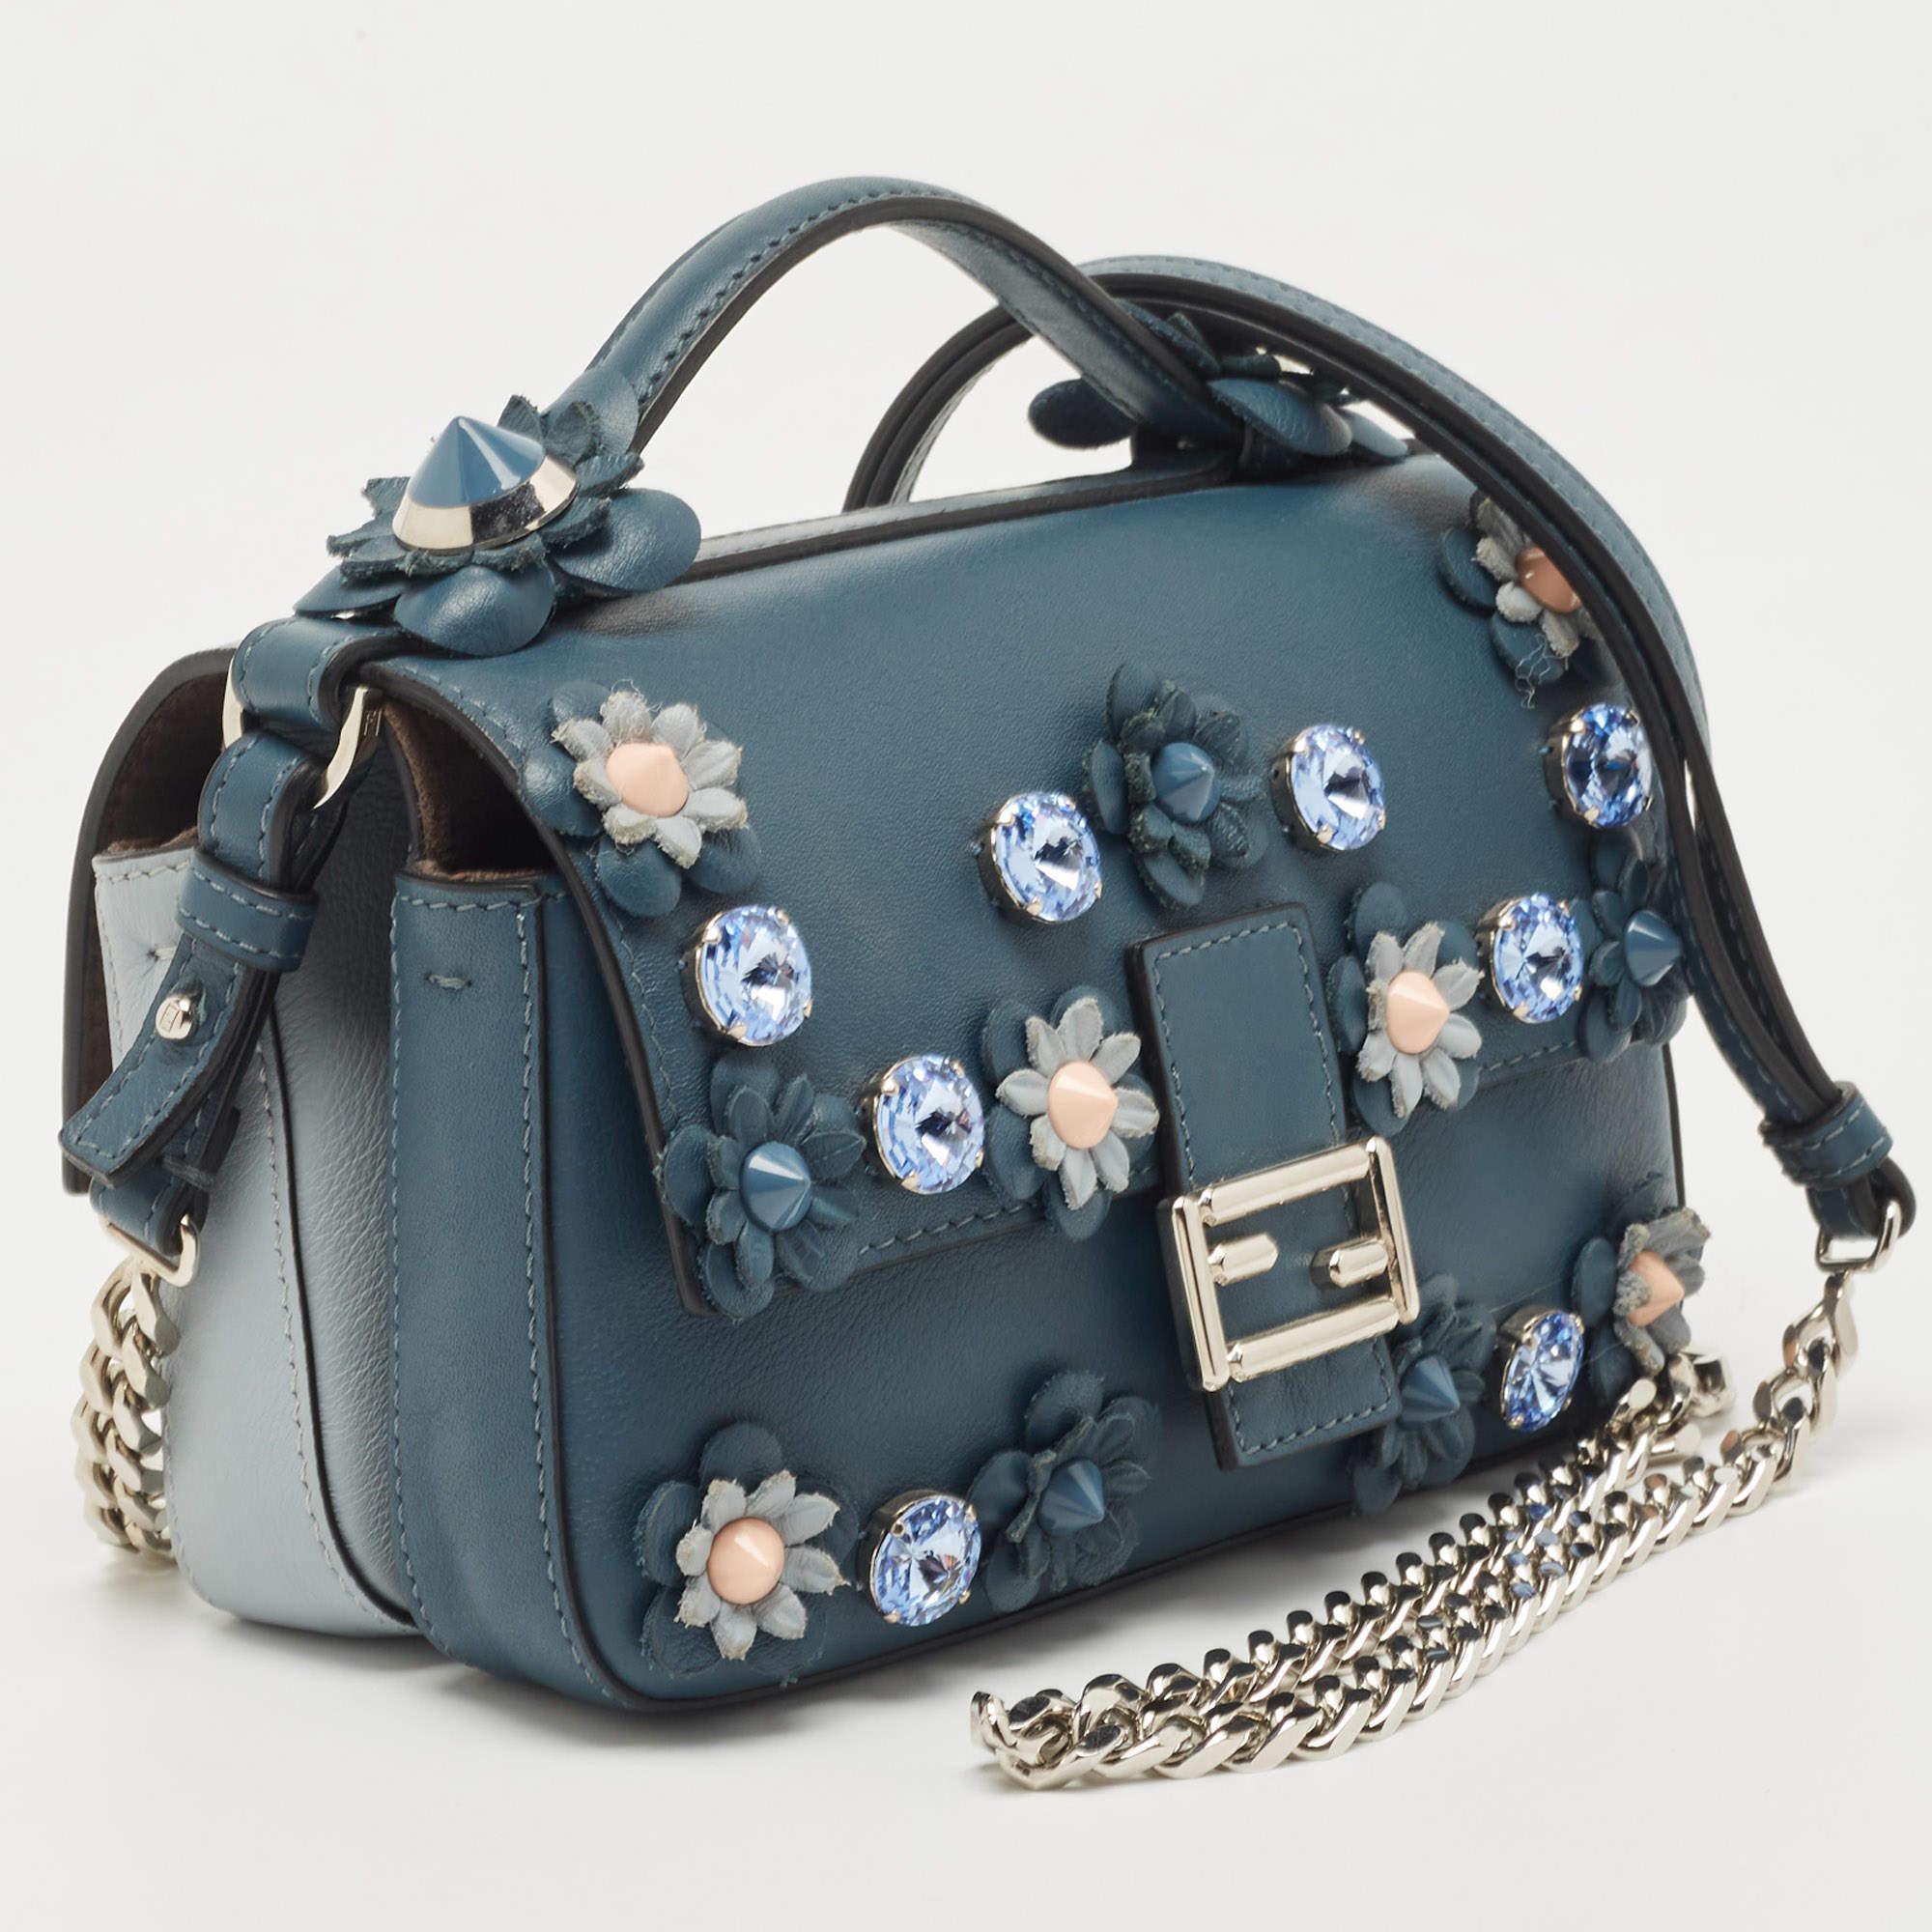 First introduced by Venturini Fendi, the Baguette was well-accepted by the fashion elite for its timeless charm and classic allure. This bag is held by a single handle at the top, and it is adorned with flower accents. Created from leather, it